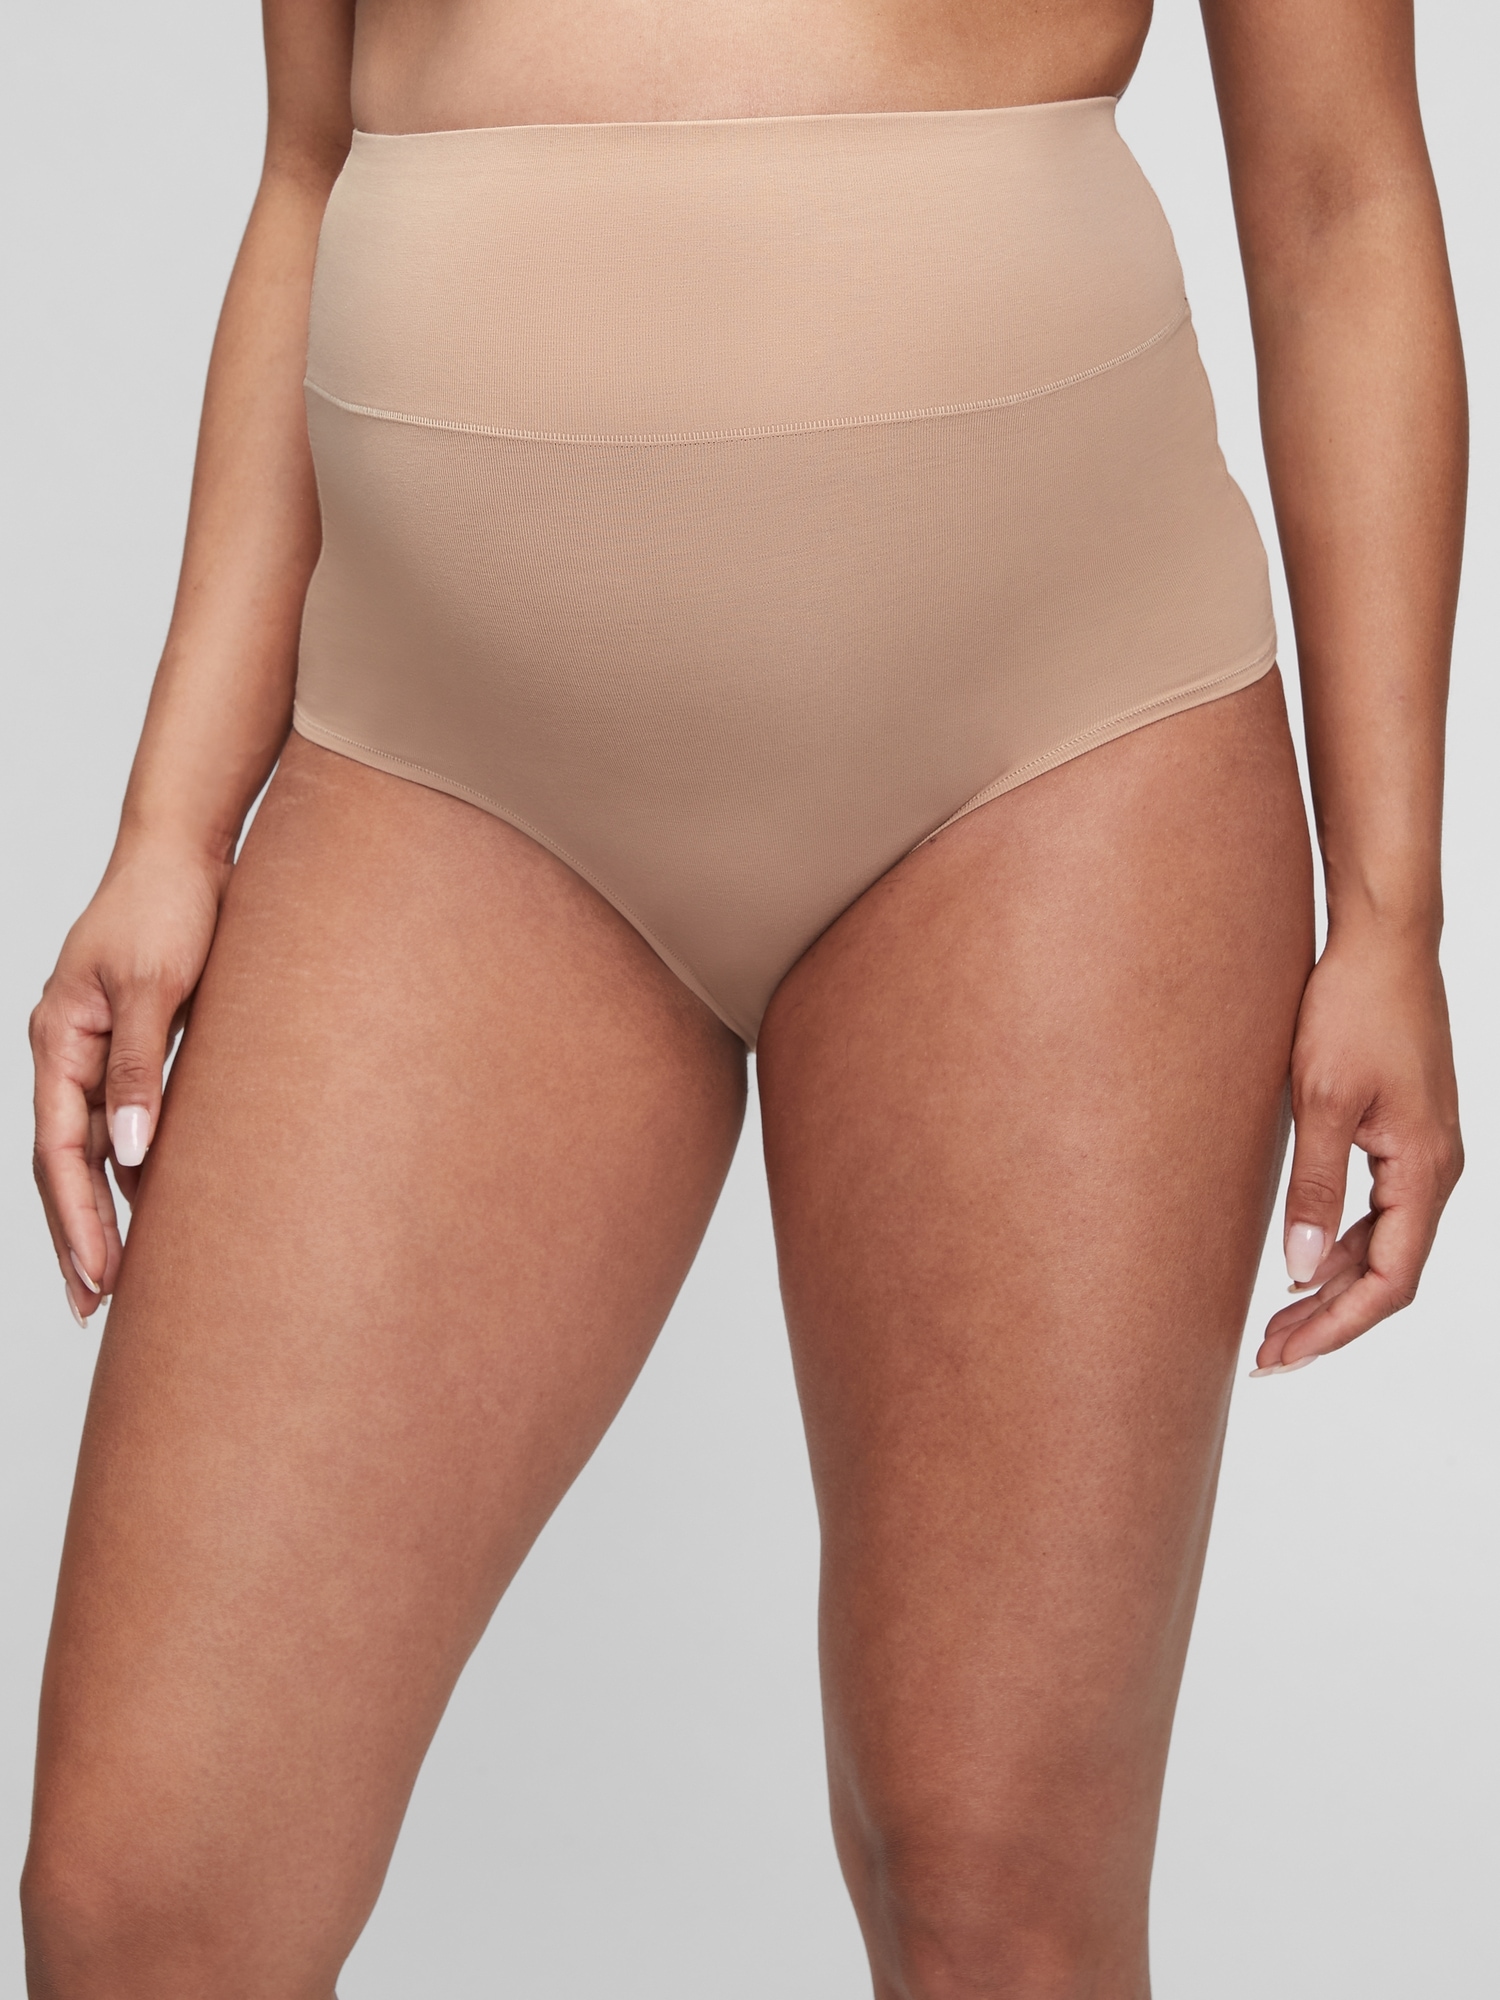 Gap Maternity Extra Support Post-Baby Briefs